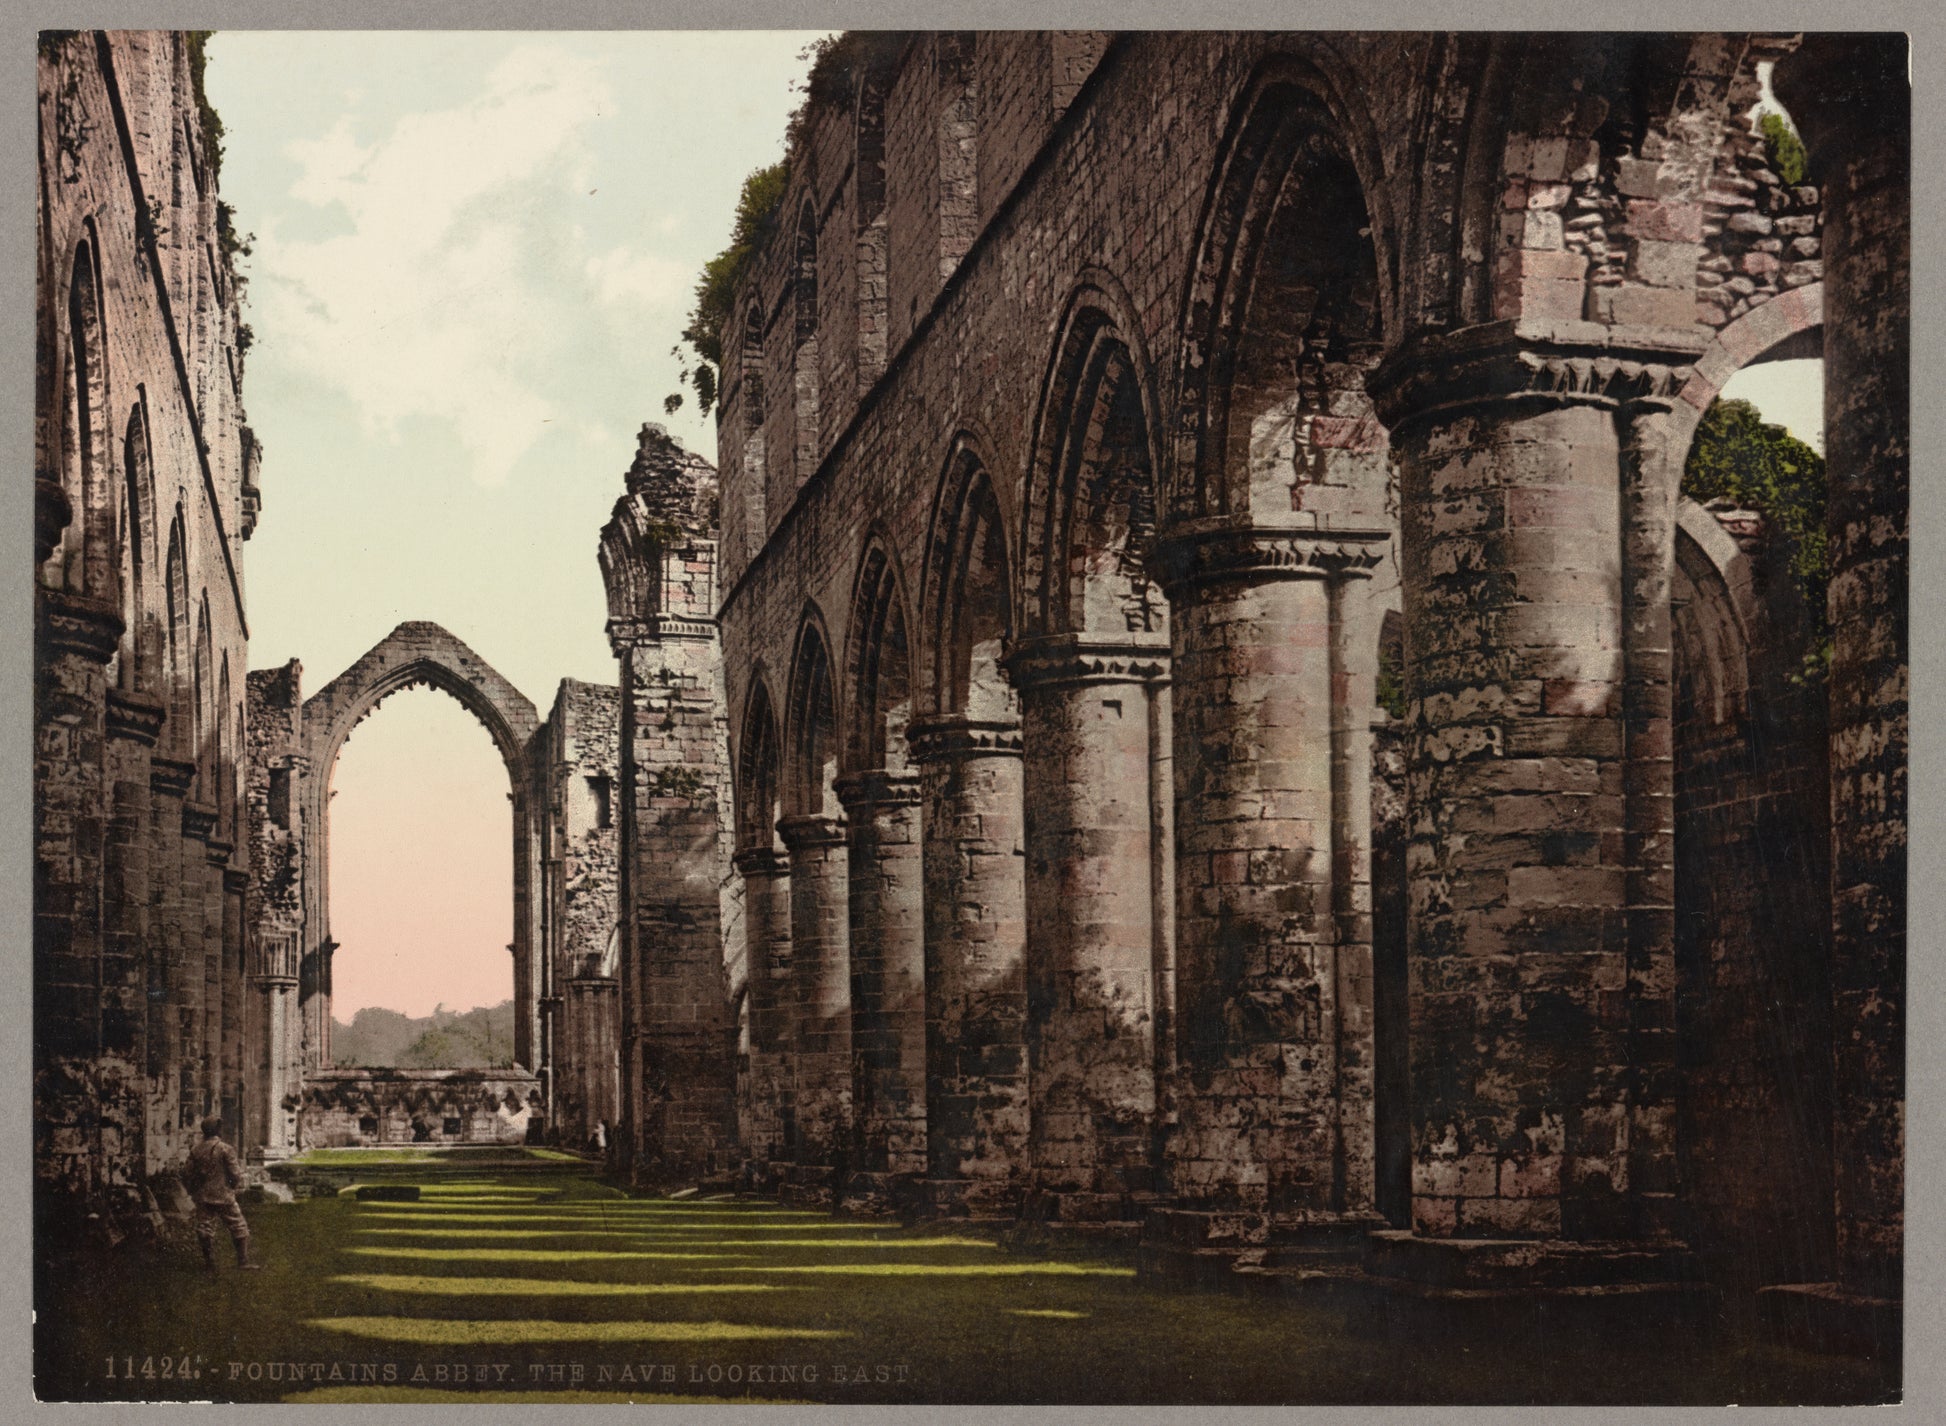 A picture of Fountains Abbey. The Nave Looking East